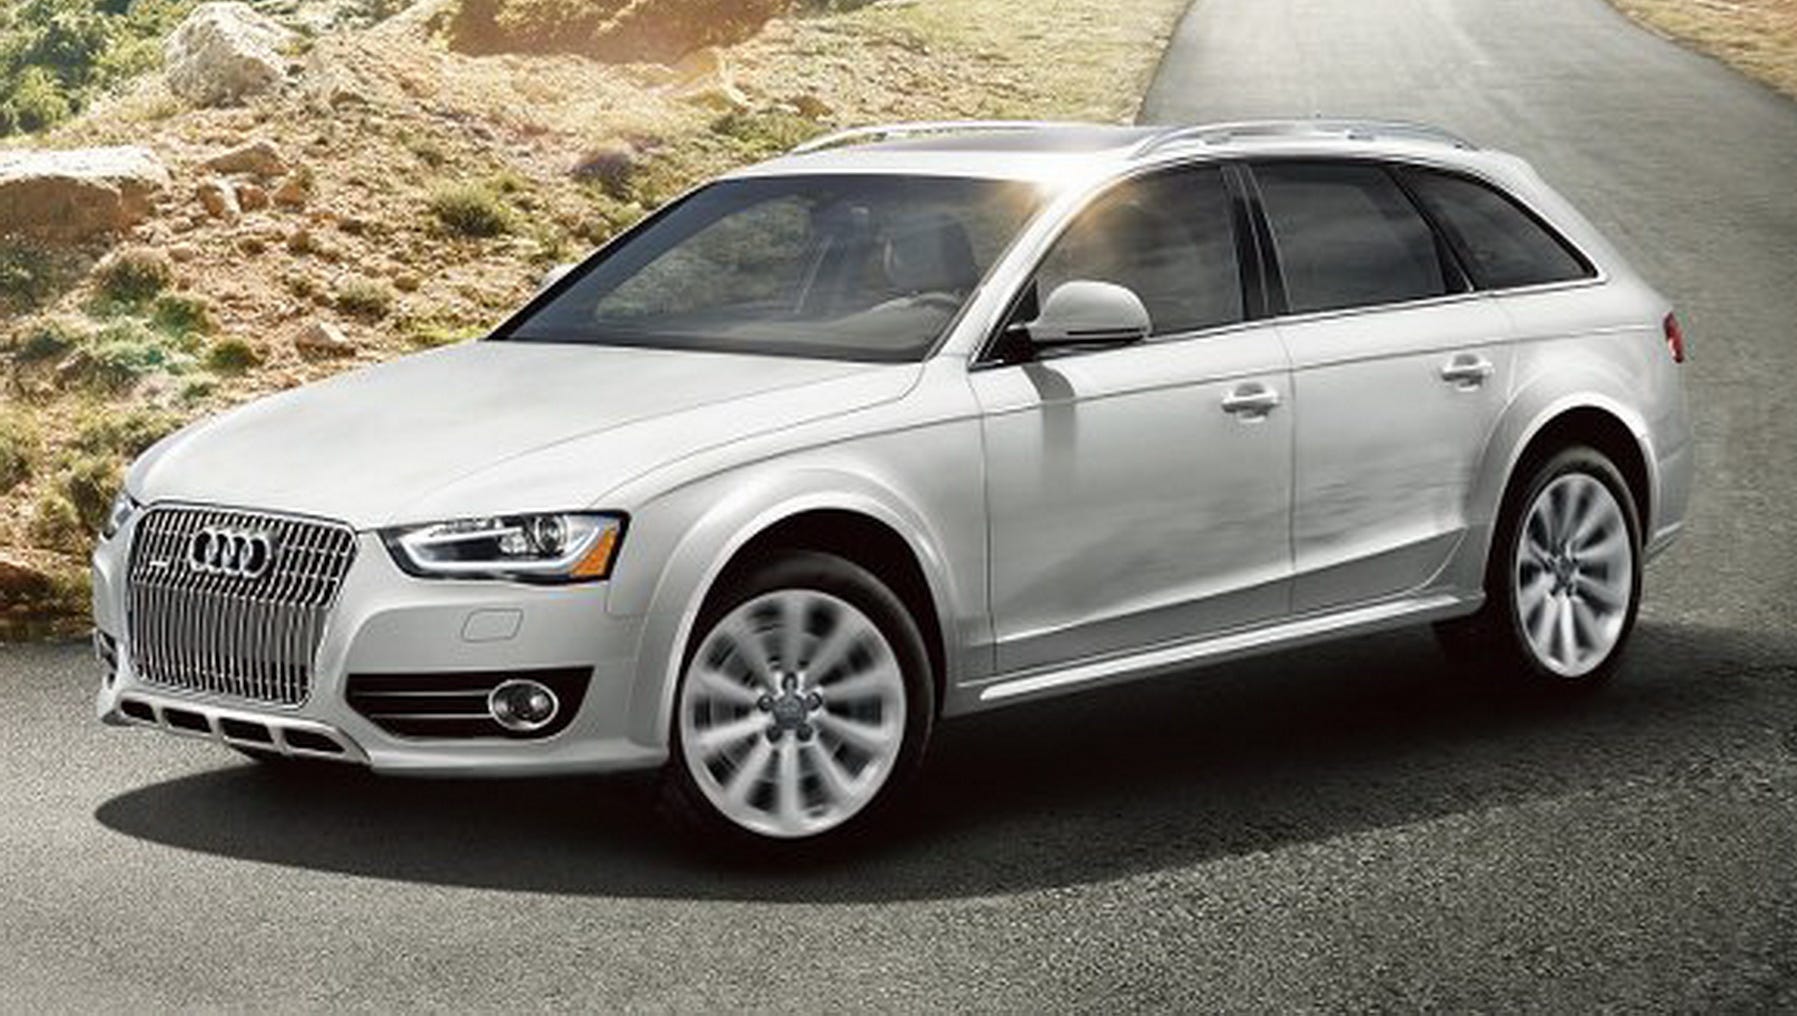 2016 Audi allroad has rugged functionality